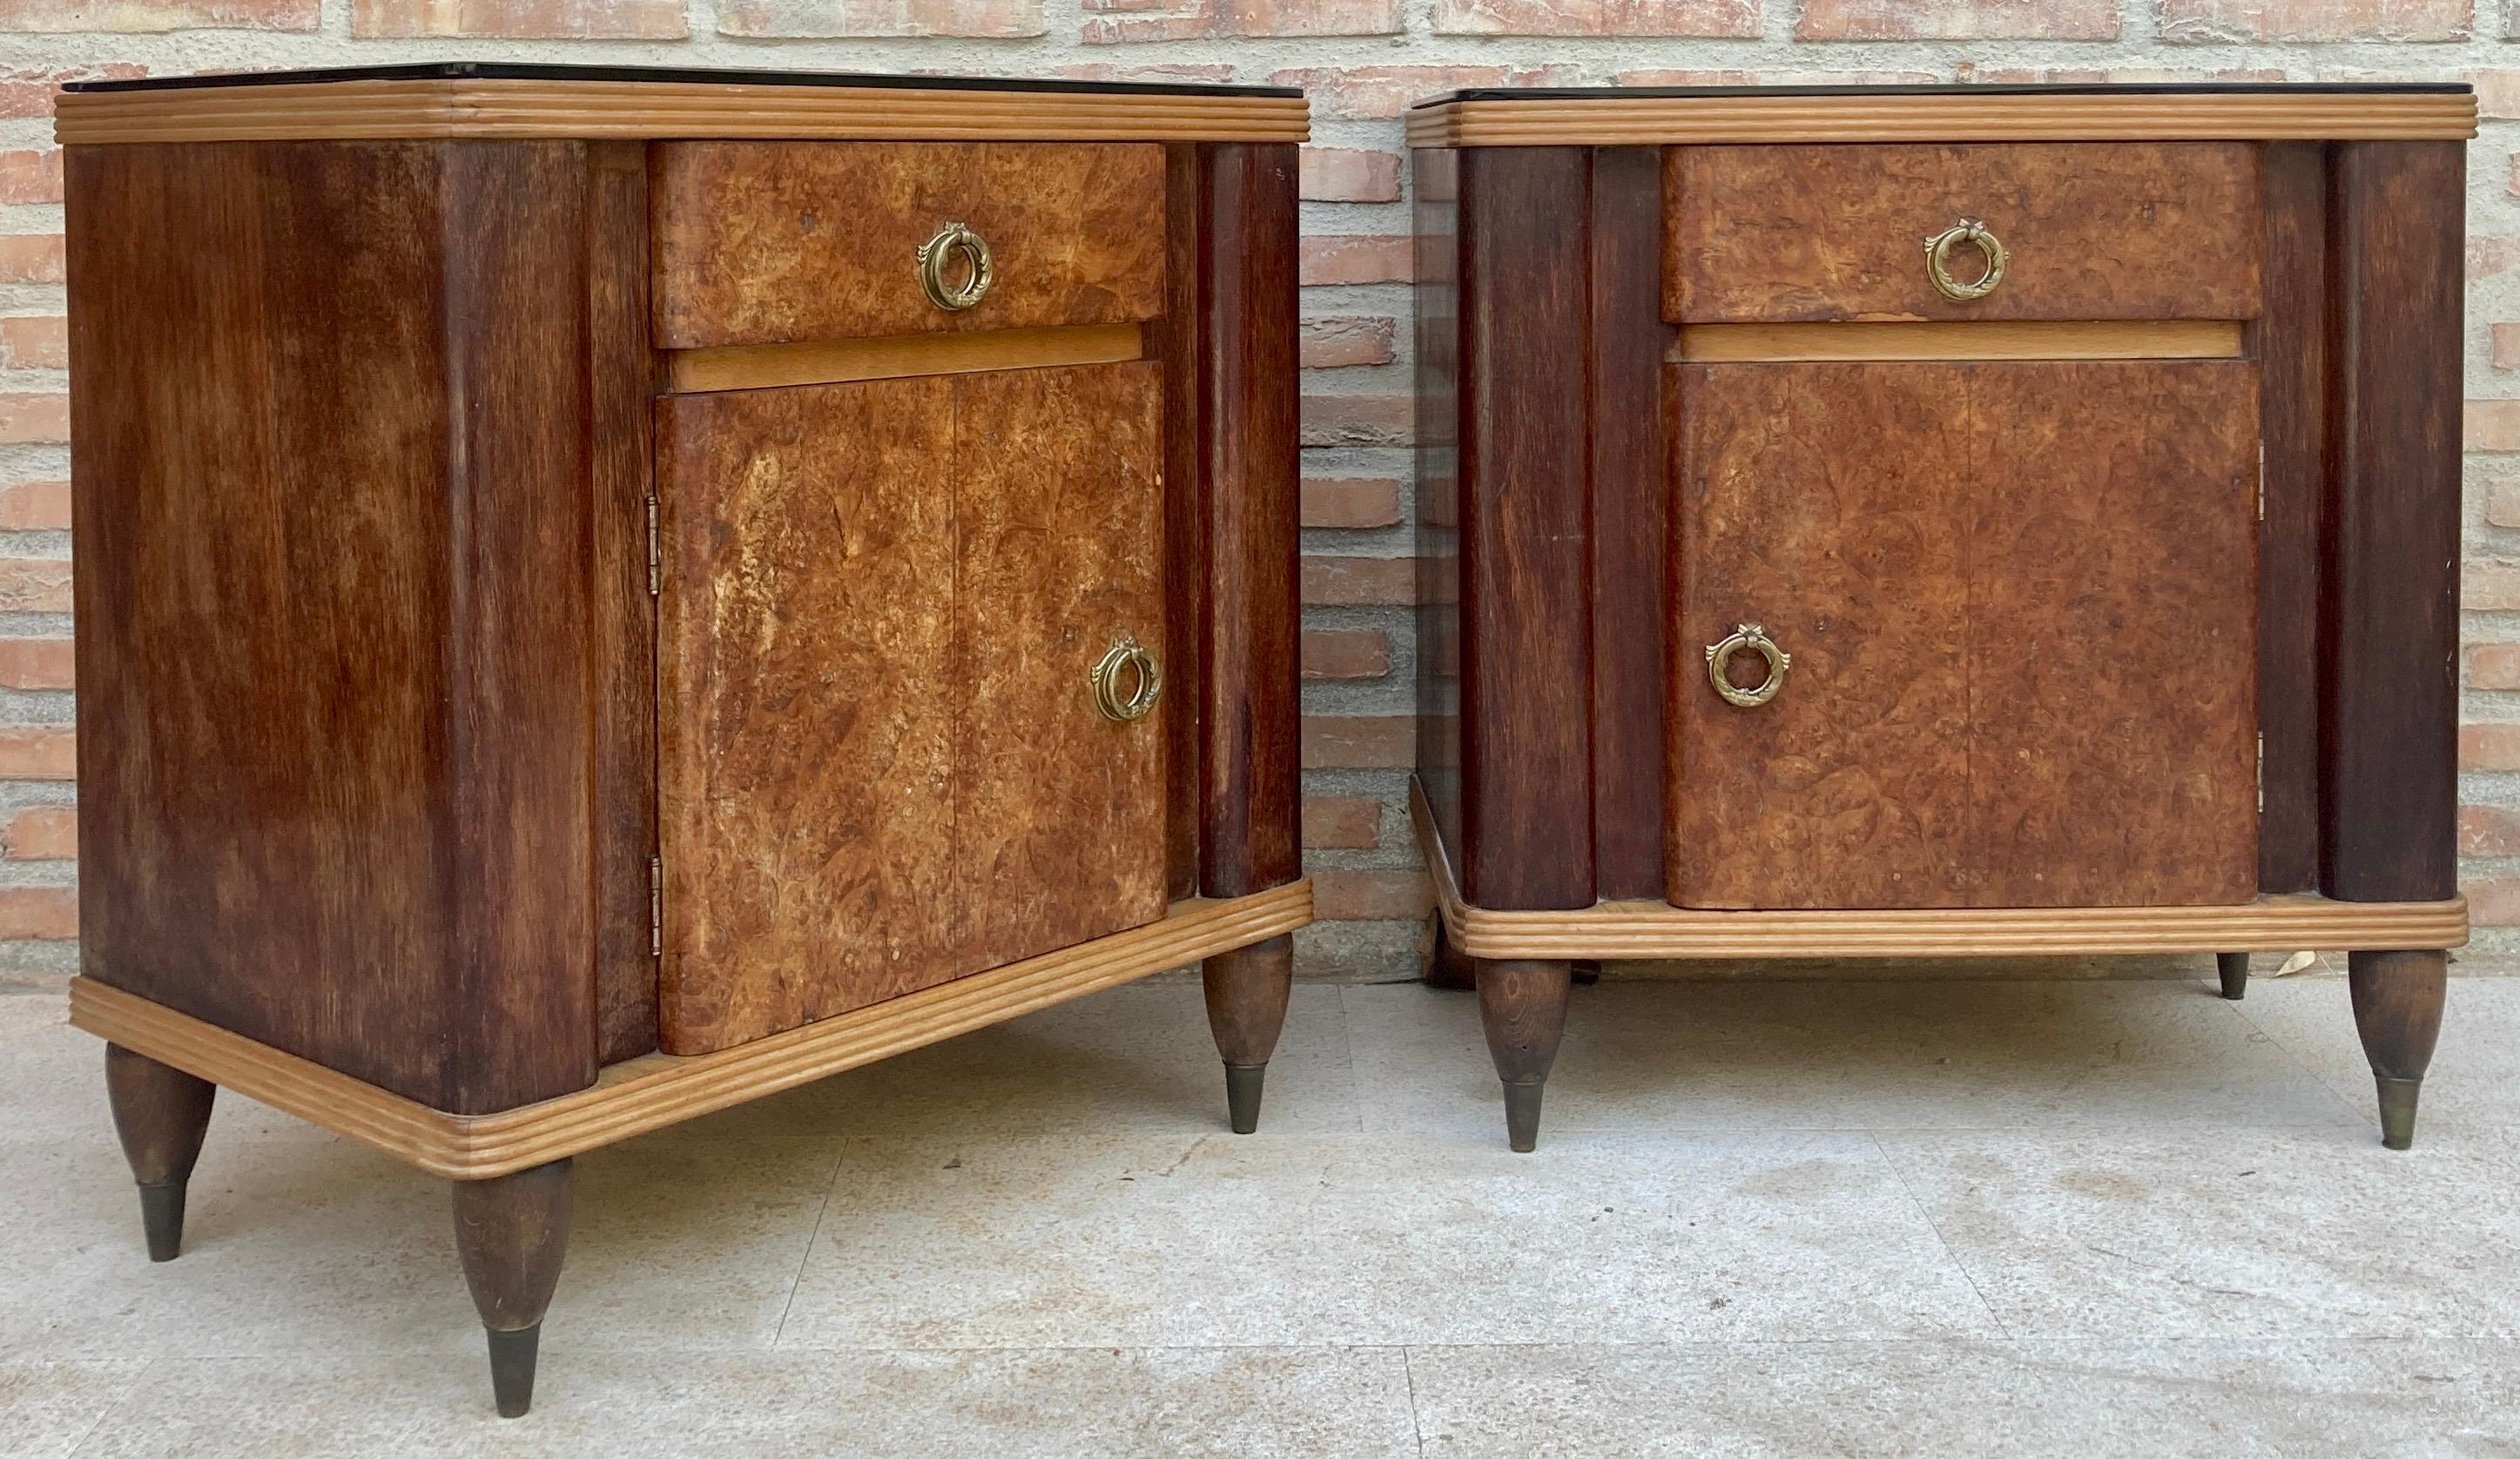 Italian Walnut and Beech Wood Nightstands with Black Glass, 1940s, Set of 2 For Sale 3